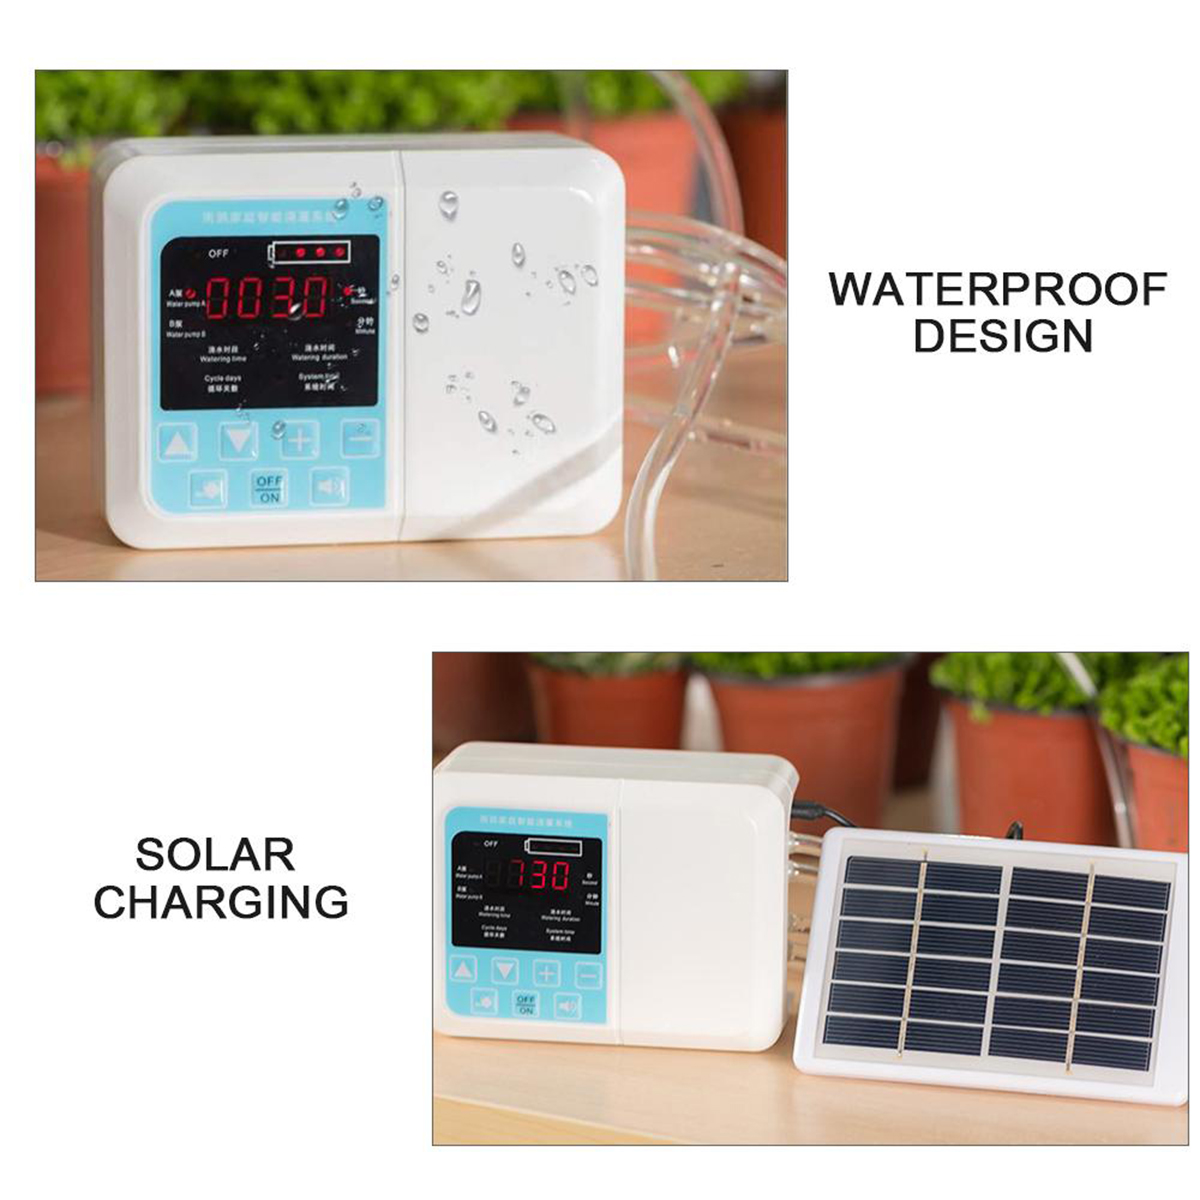 Multifunctional-Solar-Energy-Automatic-Plants-Watering-Device-Intelligent-Timing-Irrigation-Timer-Ga-1548930